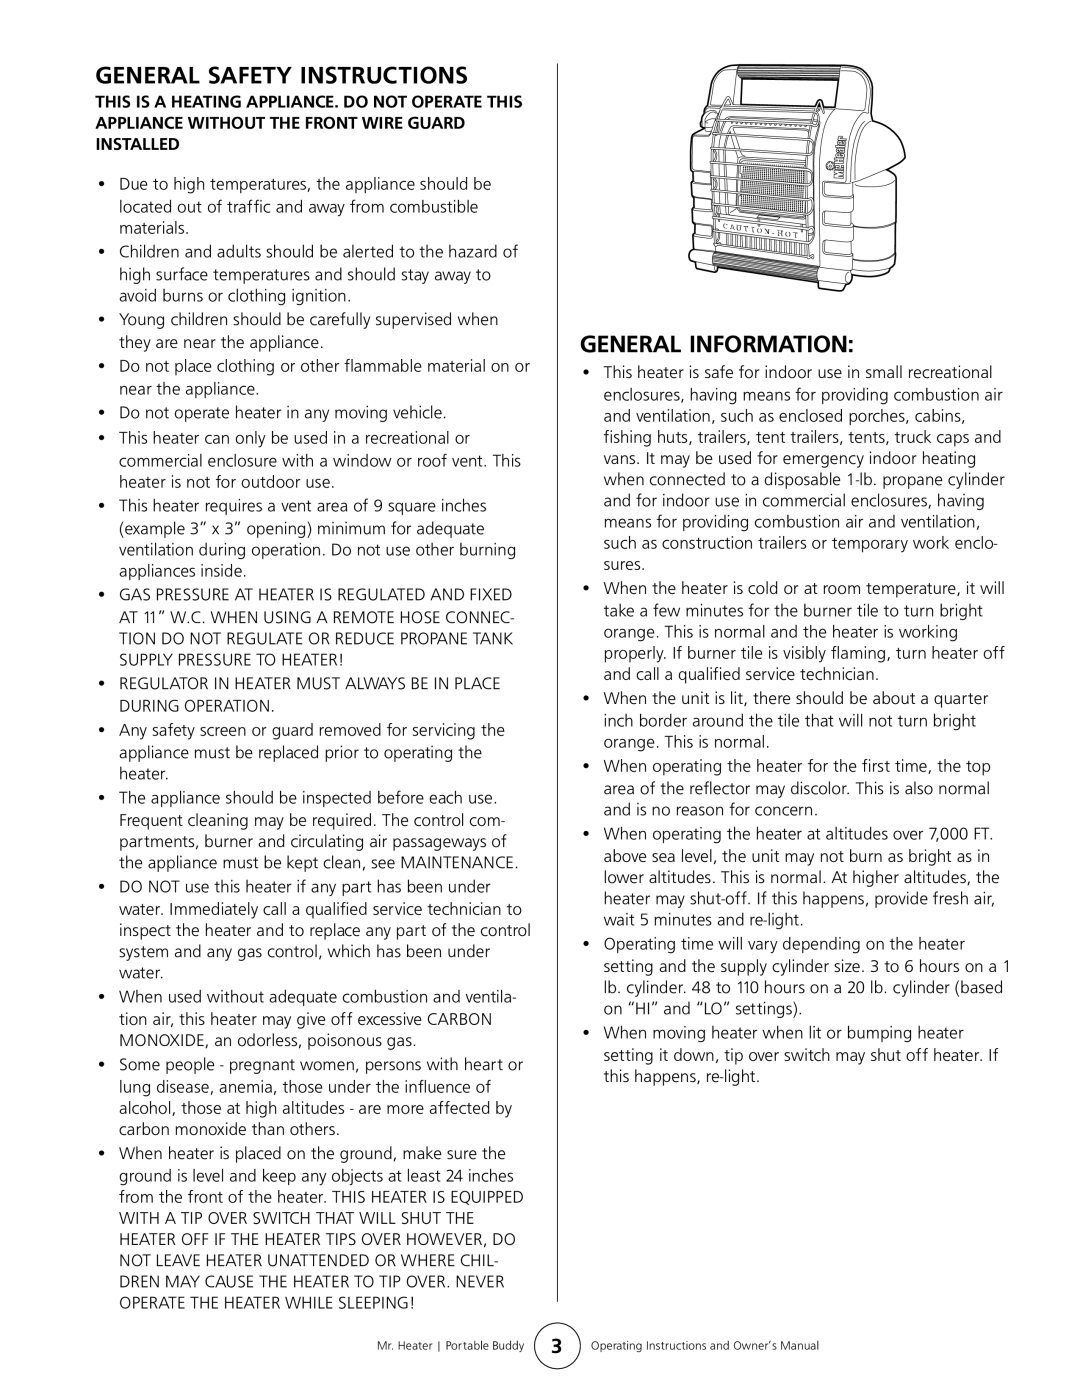 Enerco MH9B owner manual General Safety Instructions, General Information 